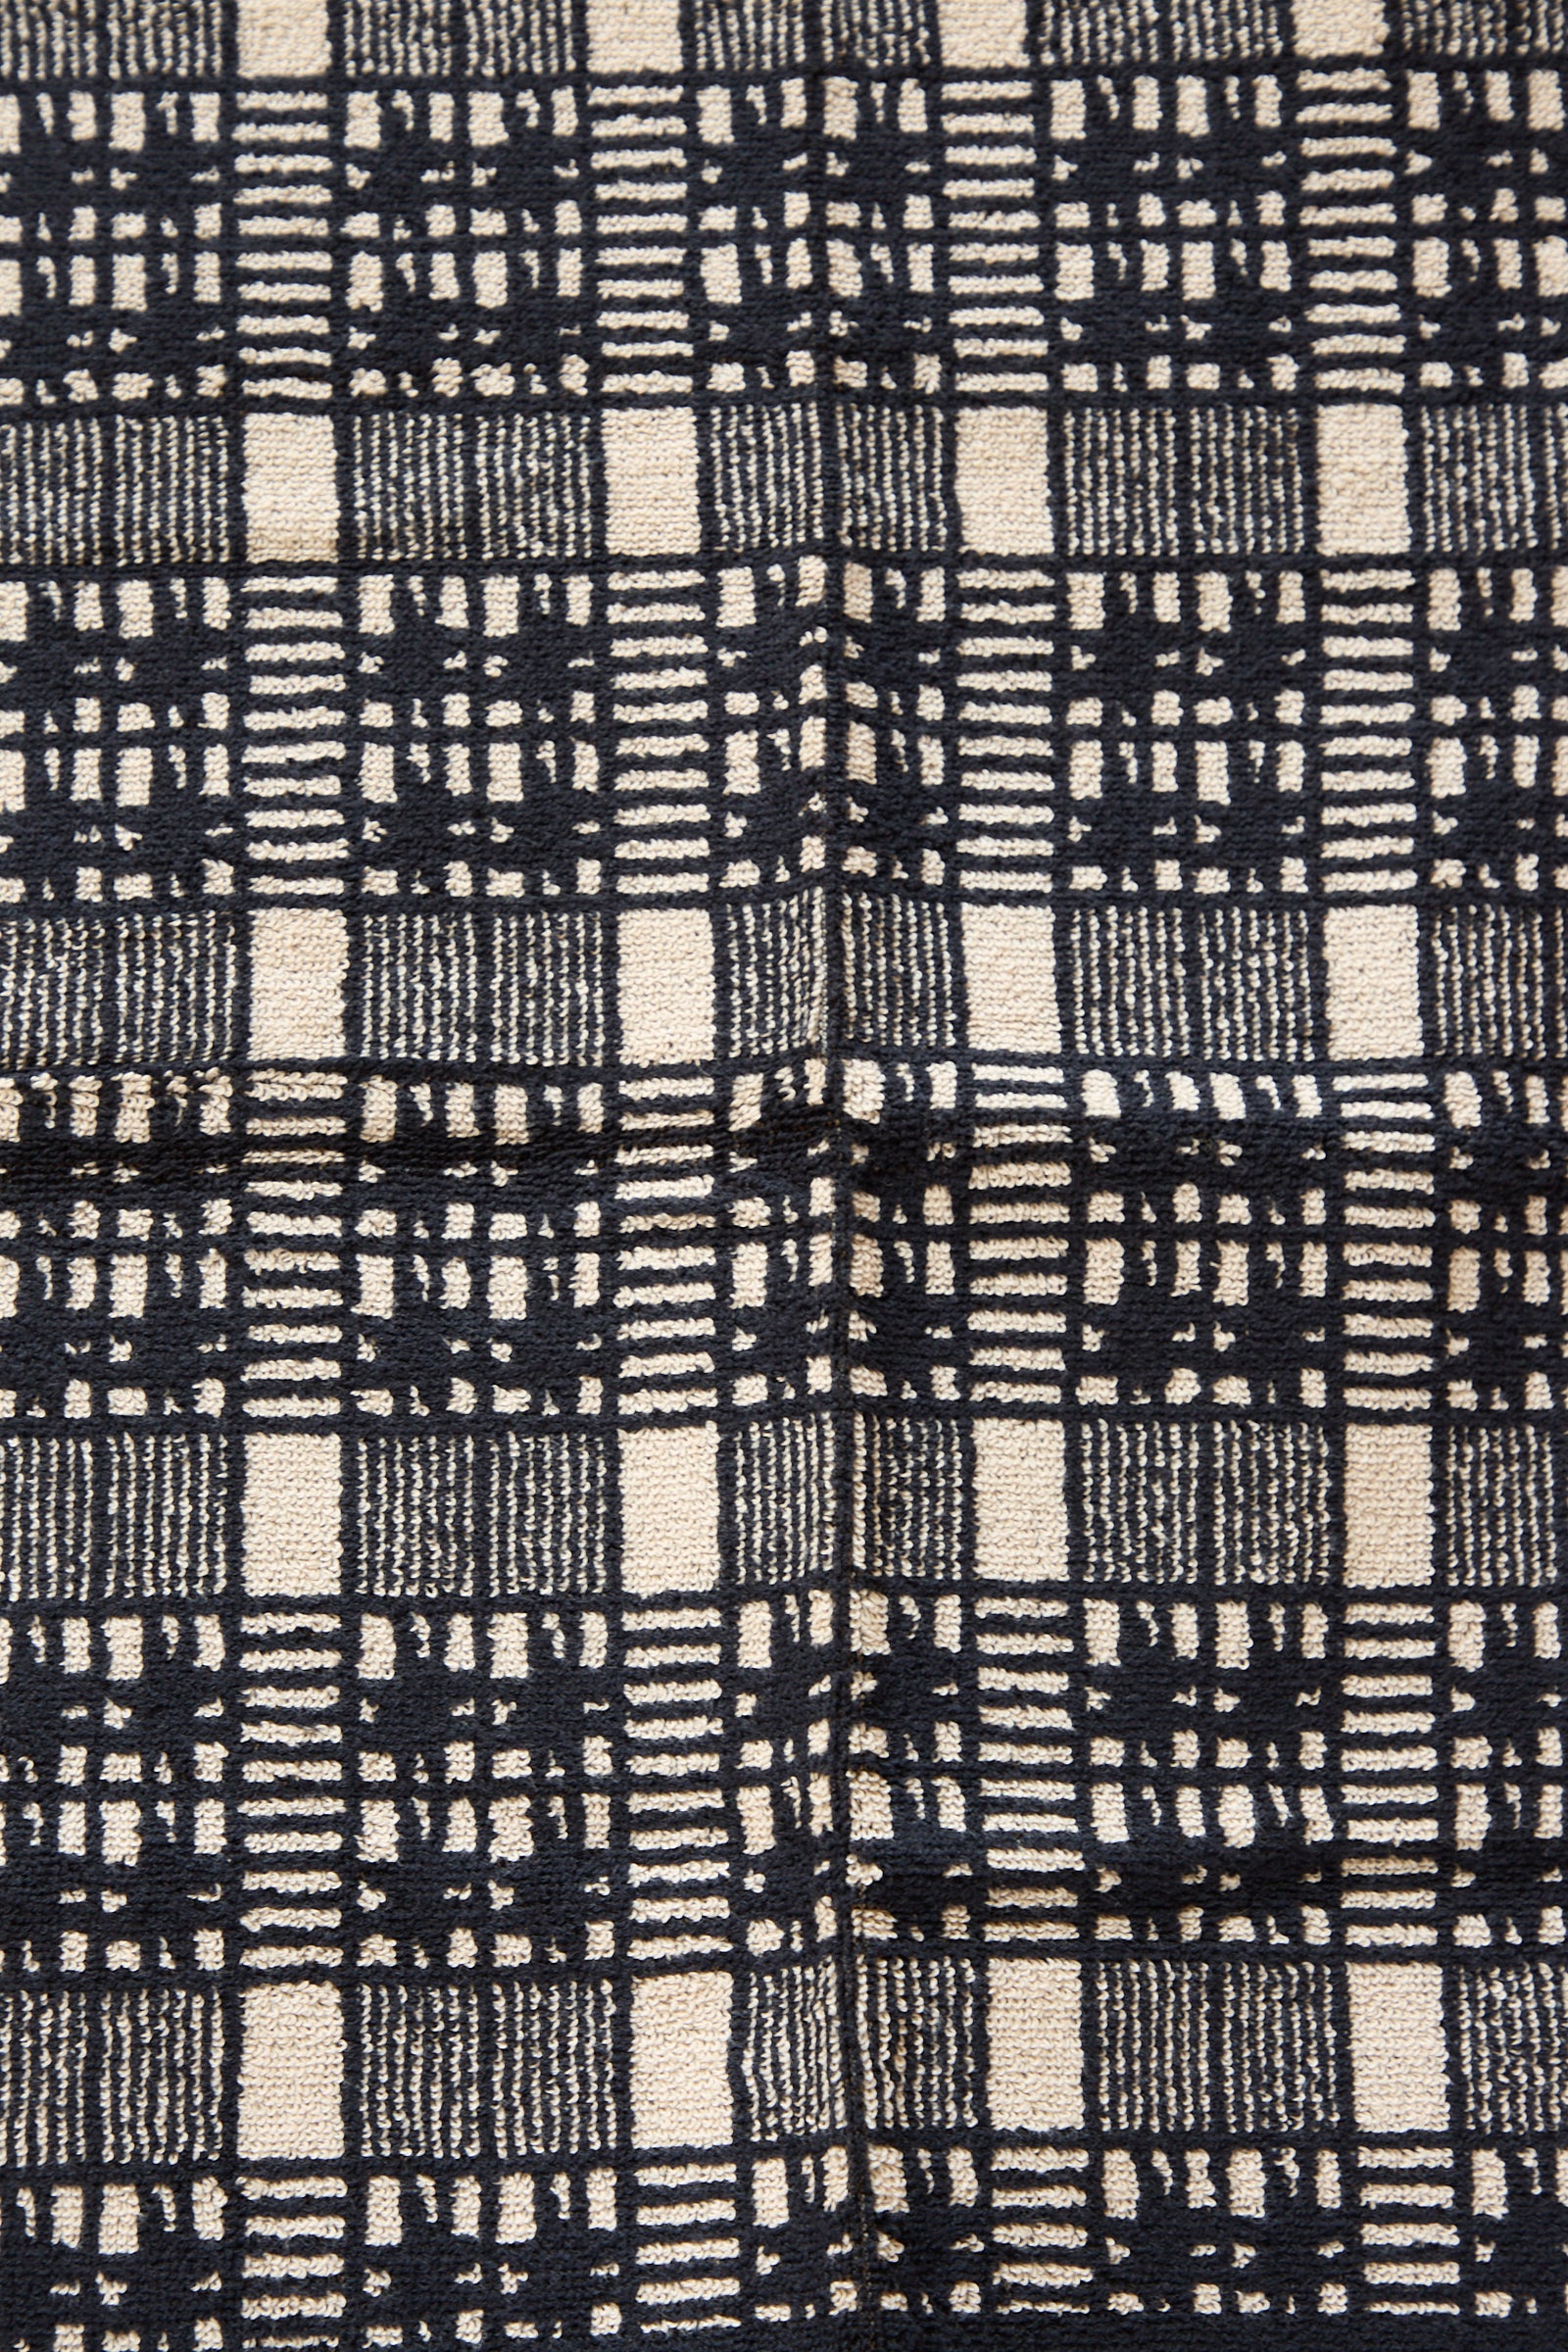 Close-up of a black and white plaid Alma Hand Towel fabric texture from Autumn Sonata.